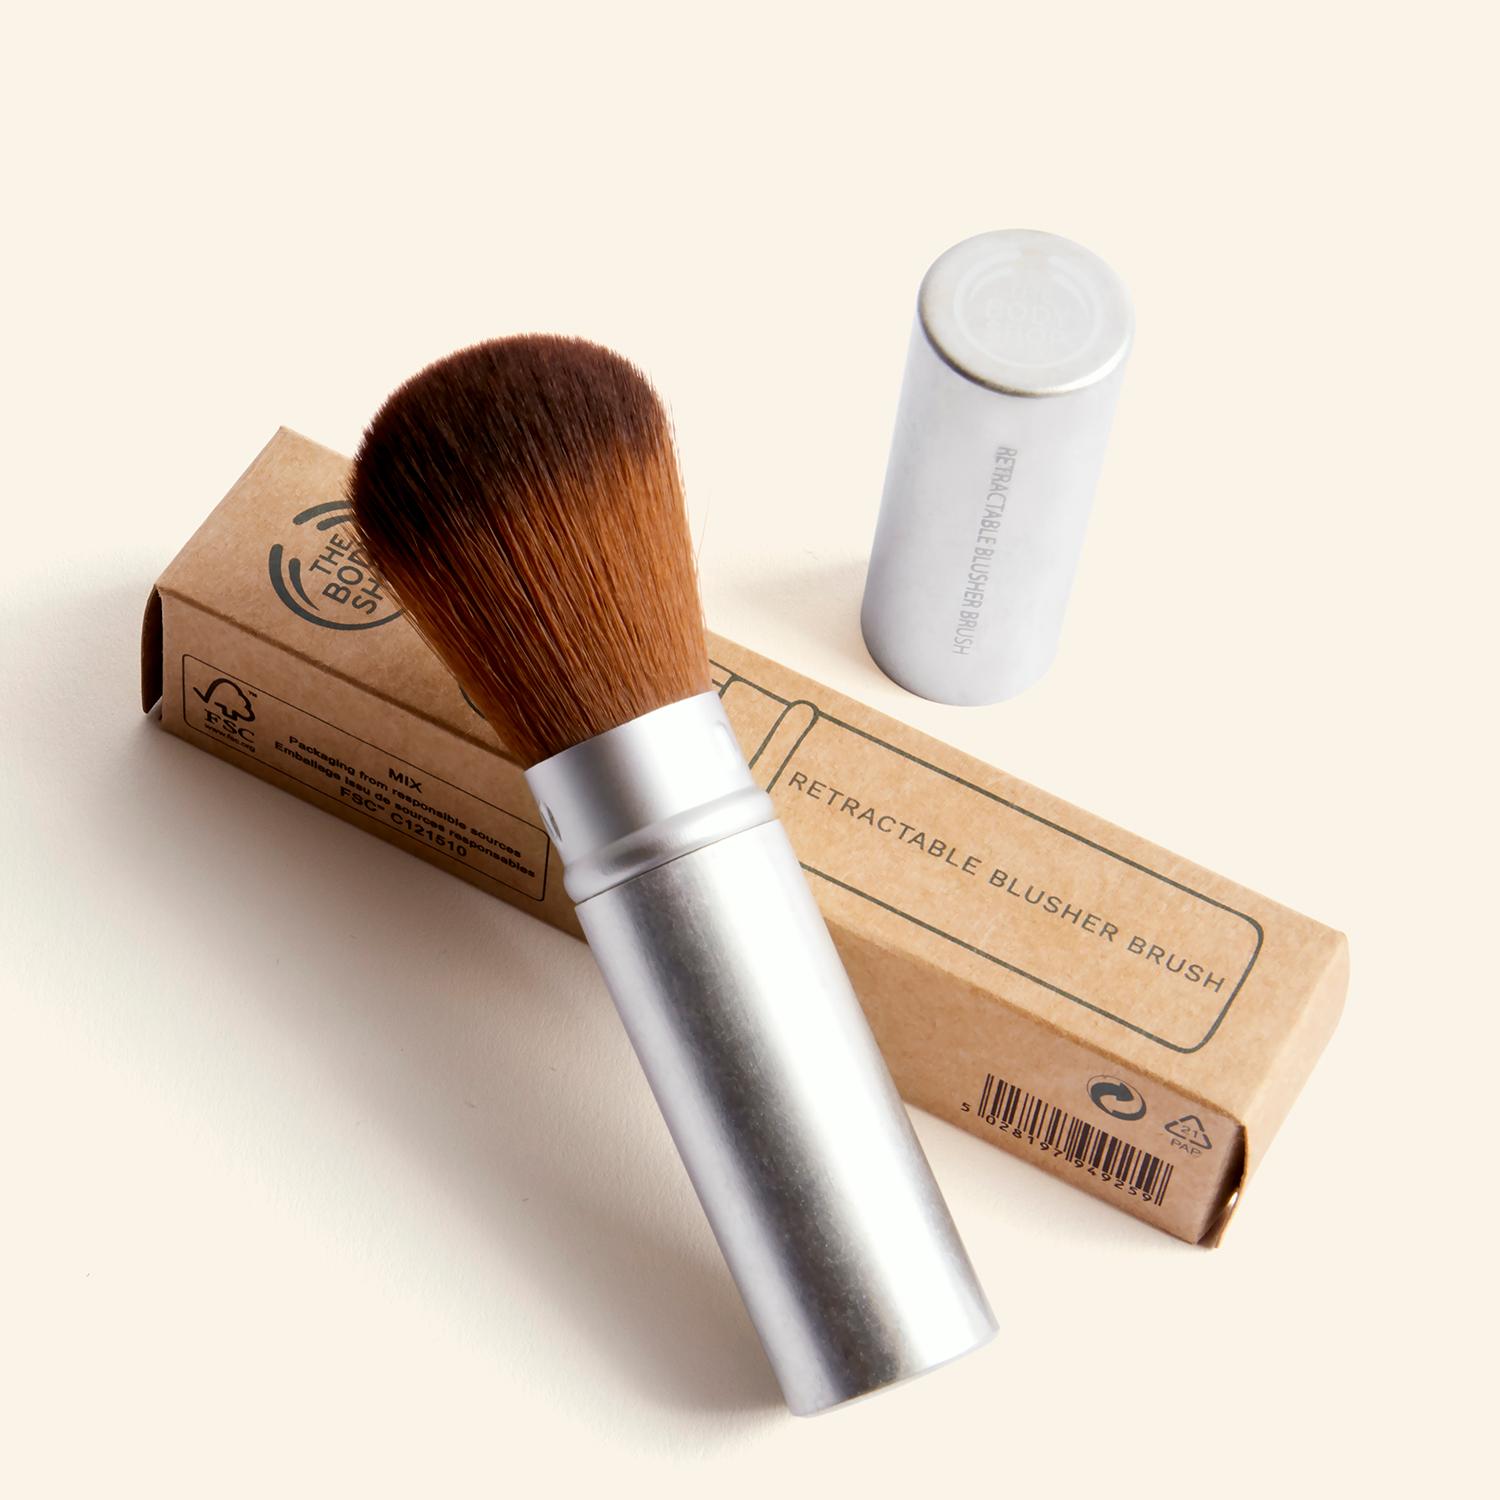 The Body Shop | The Body Shop Retractable Blusher Brush - Silver (1 pc)